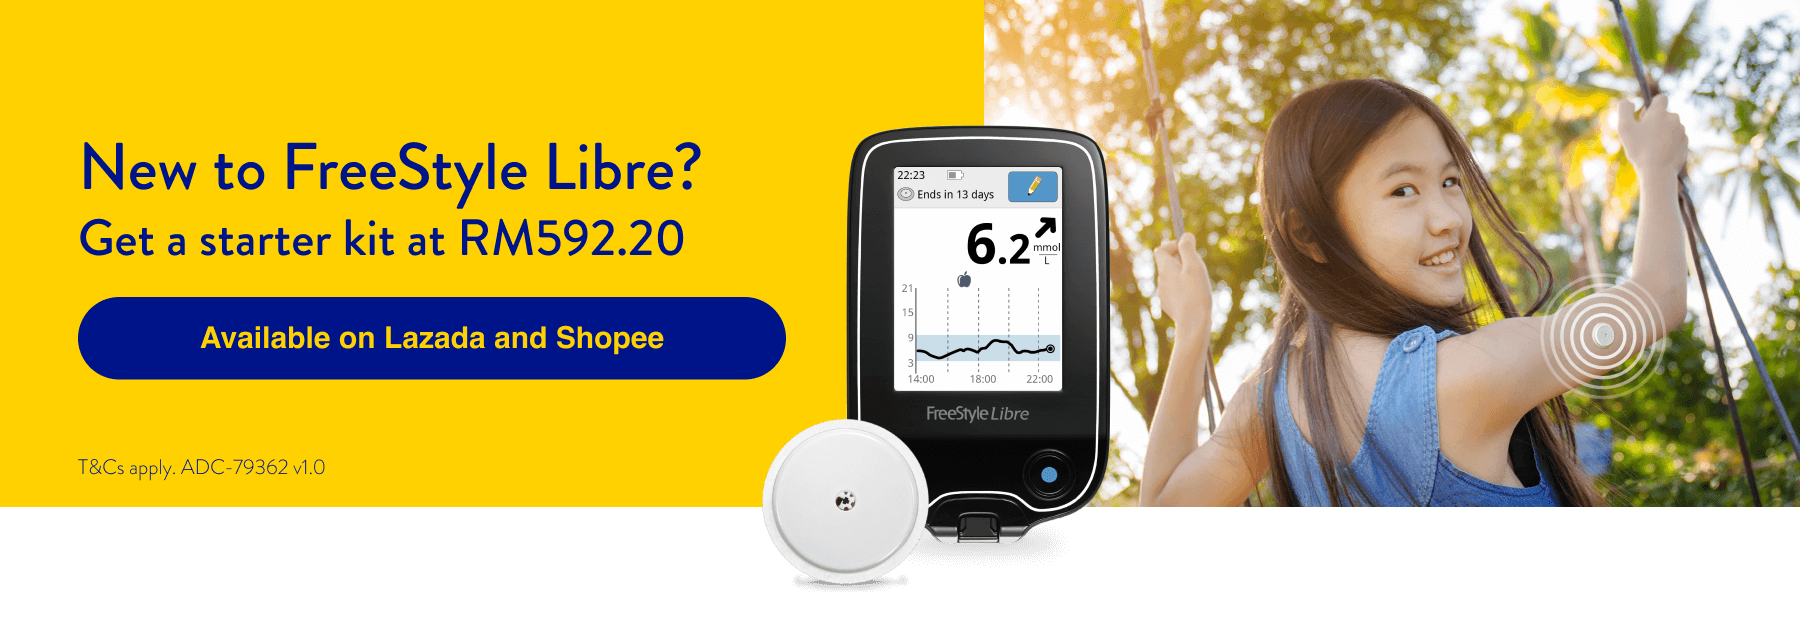 New to FreeStyle Libre? Get a starter kit and receive a FREE sensor on us at RM564 (U.P. RM846)